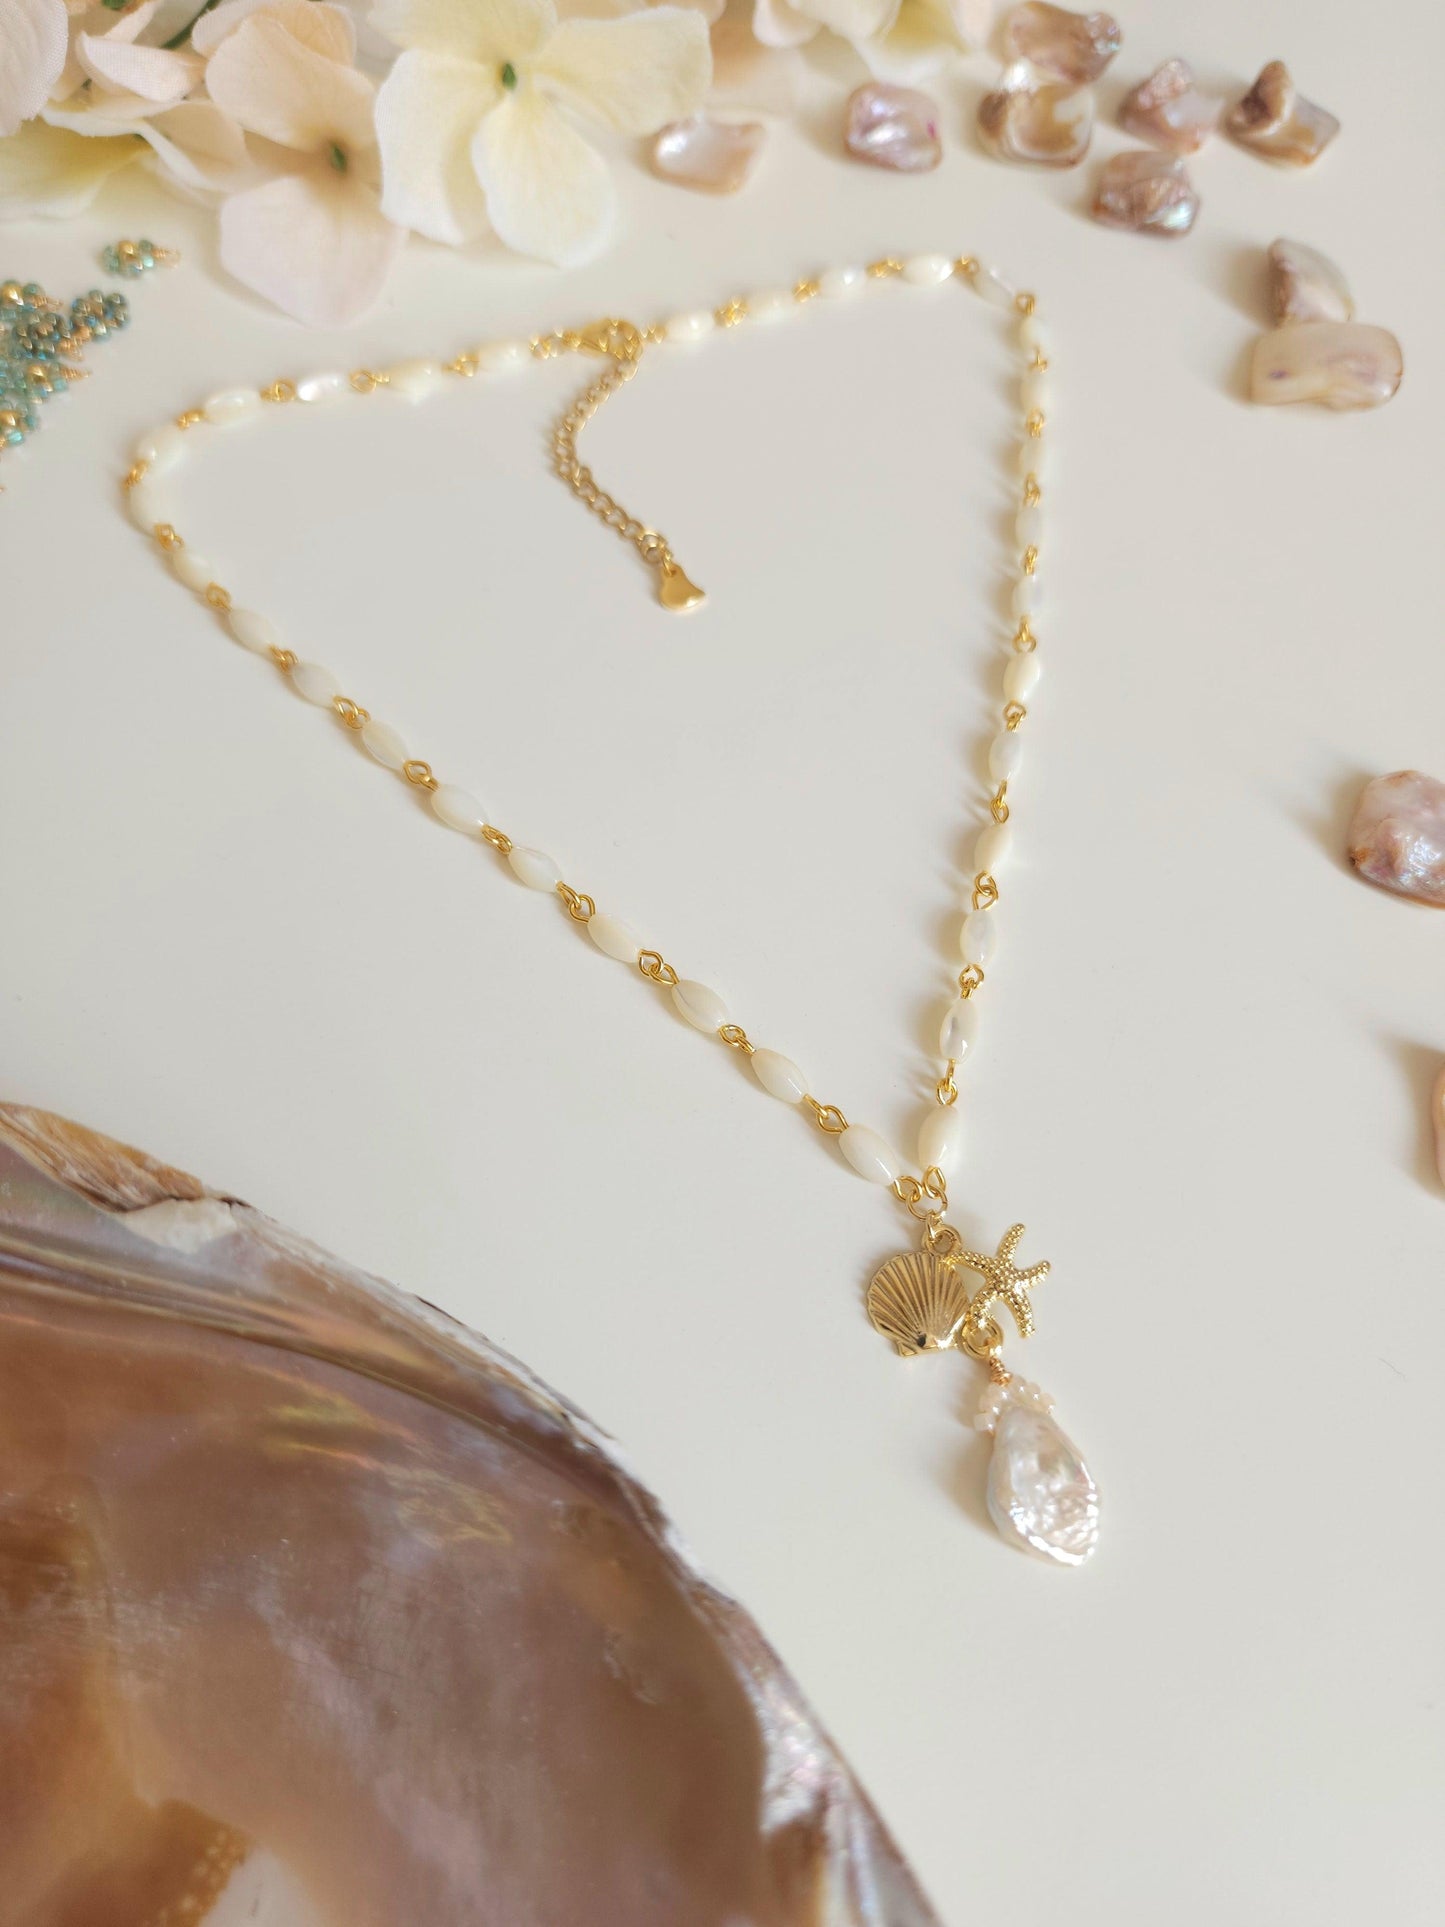 Pearl Belle Necklace - By Cocoyu